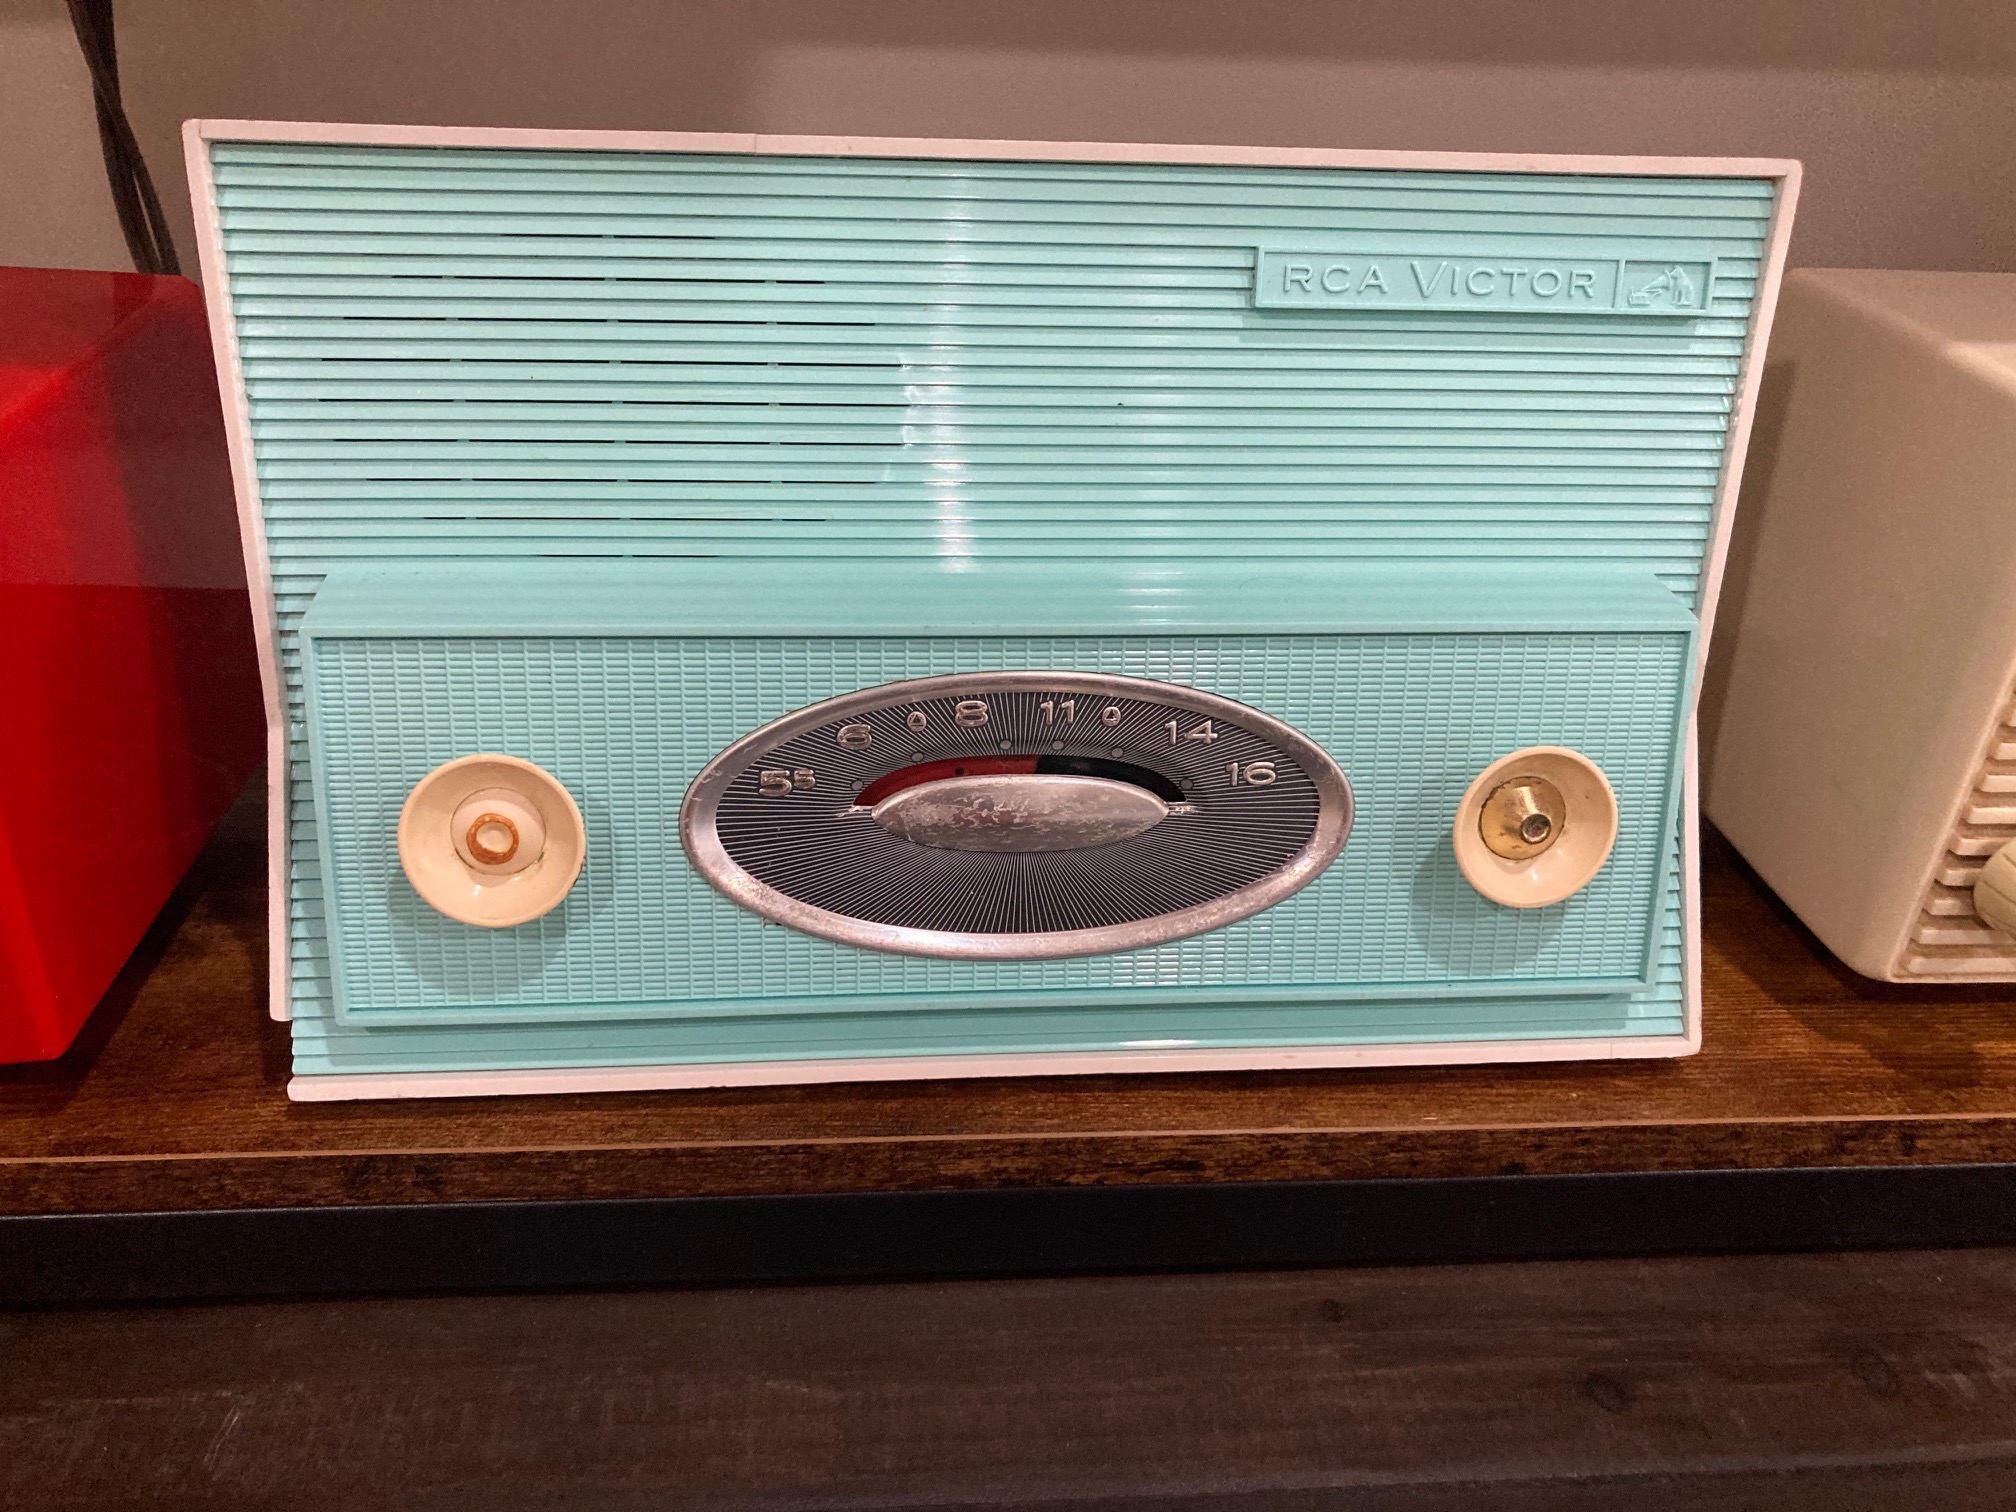 1957 RCA Victor Model 1-RA-55, Turquoise and White